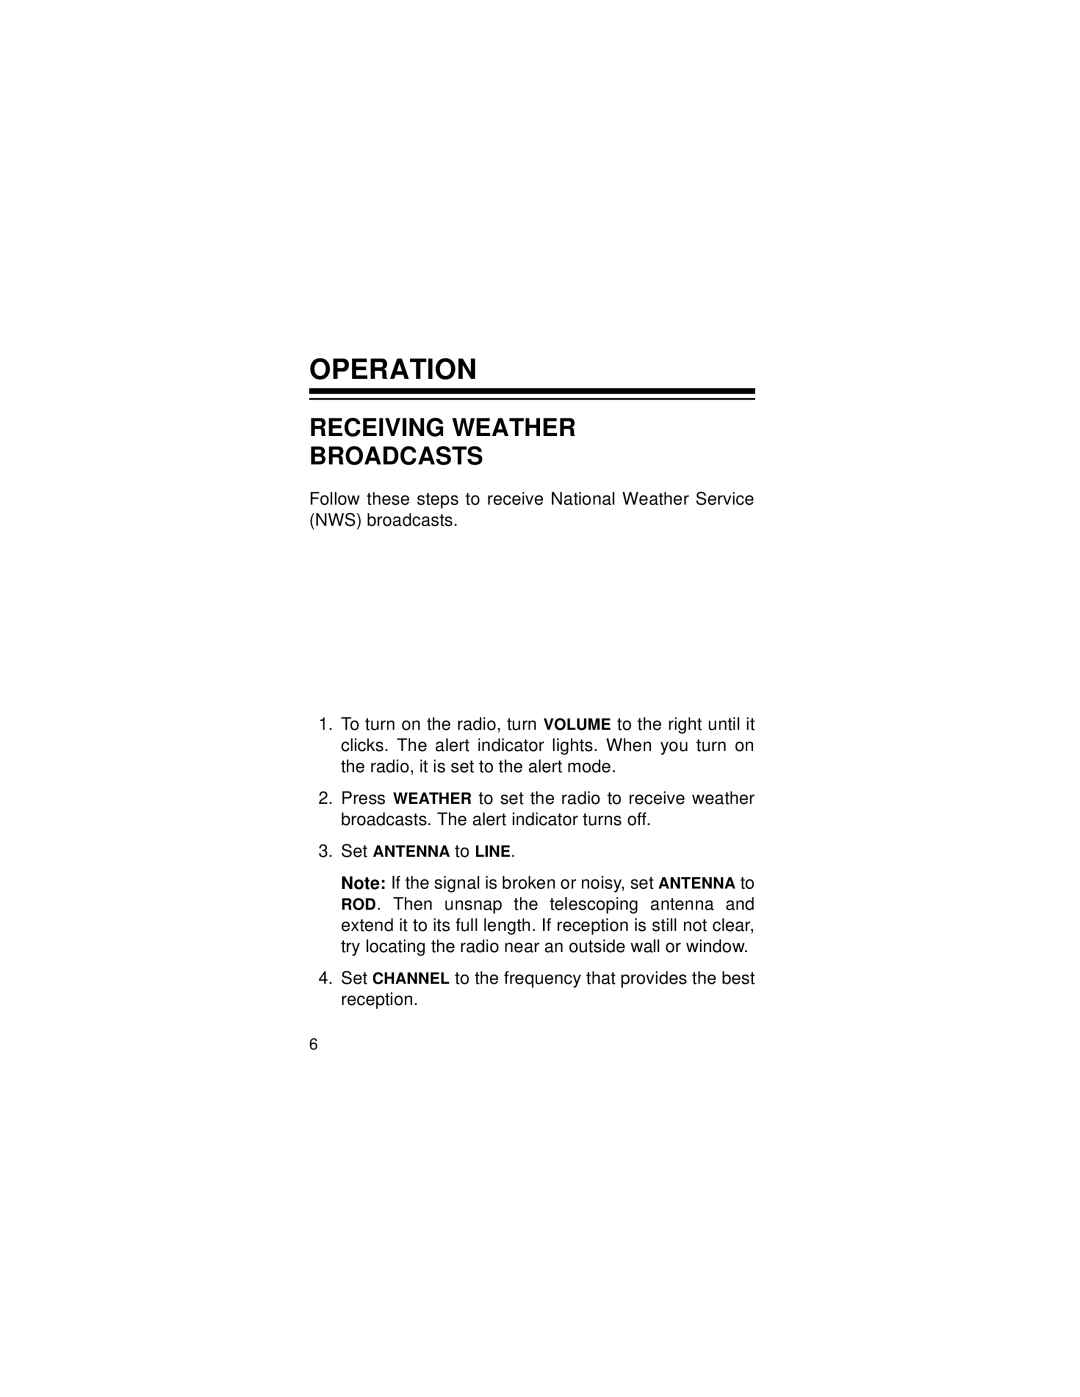 Radio Shack 12-240 owner manual Operation, Receiving Weather Broadcasts 